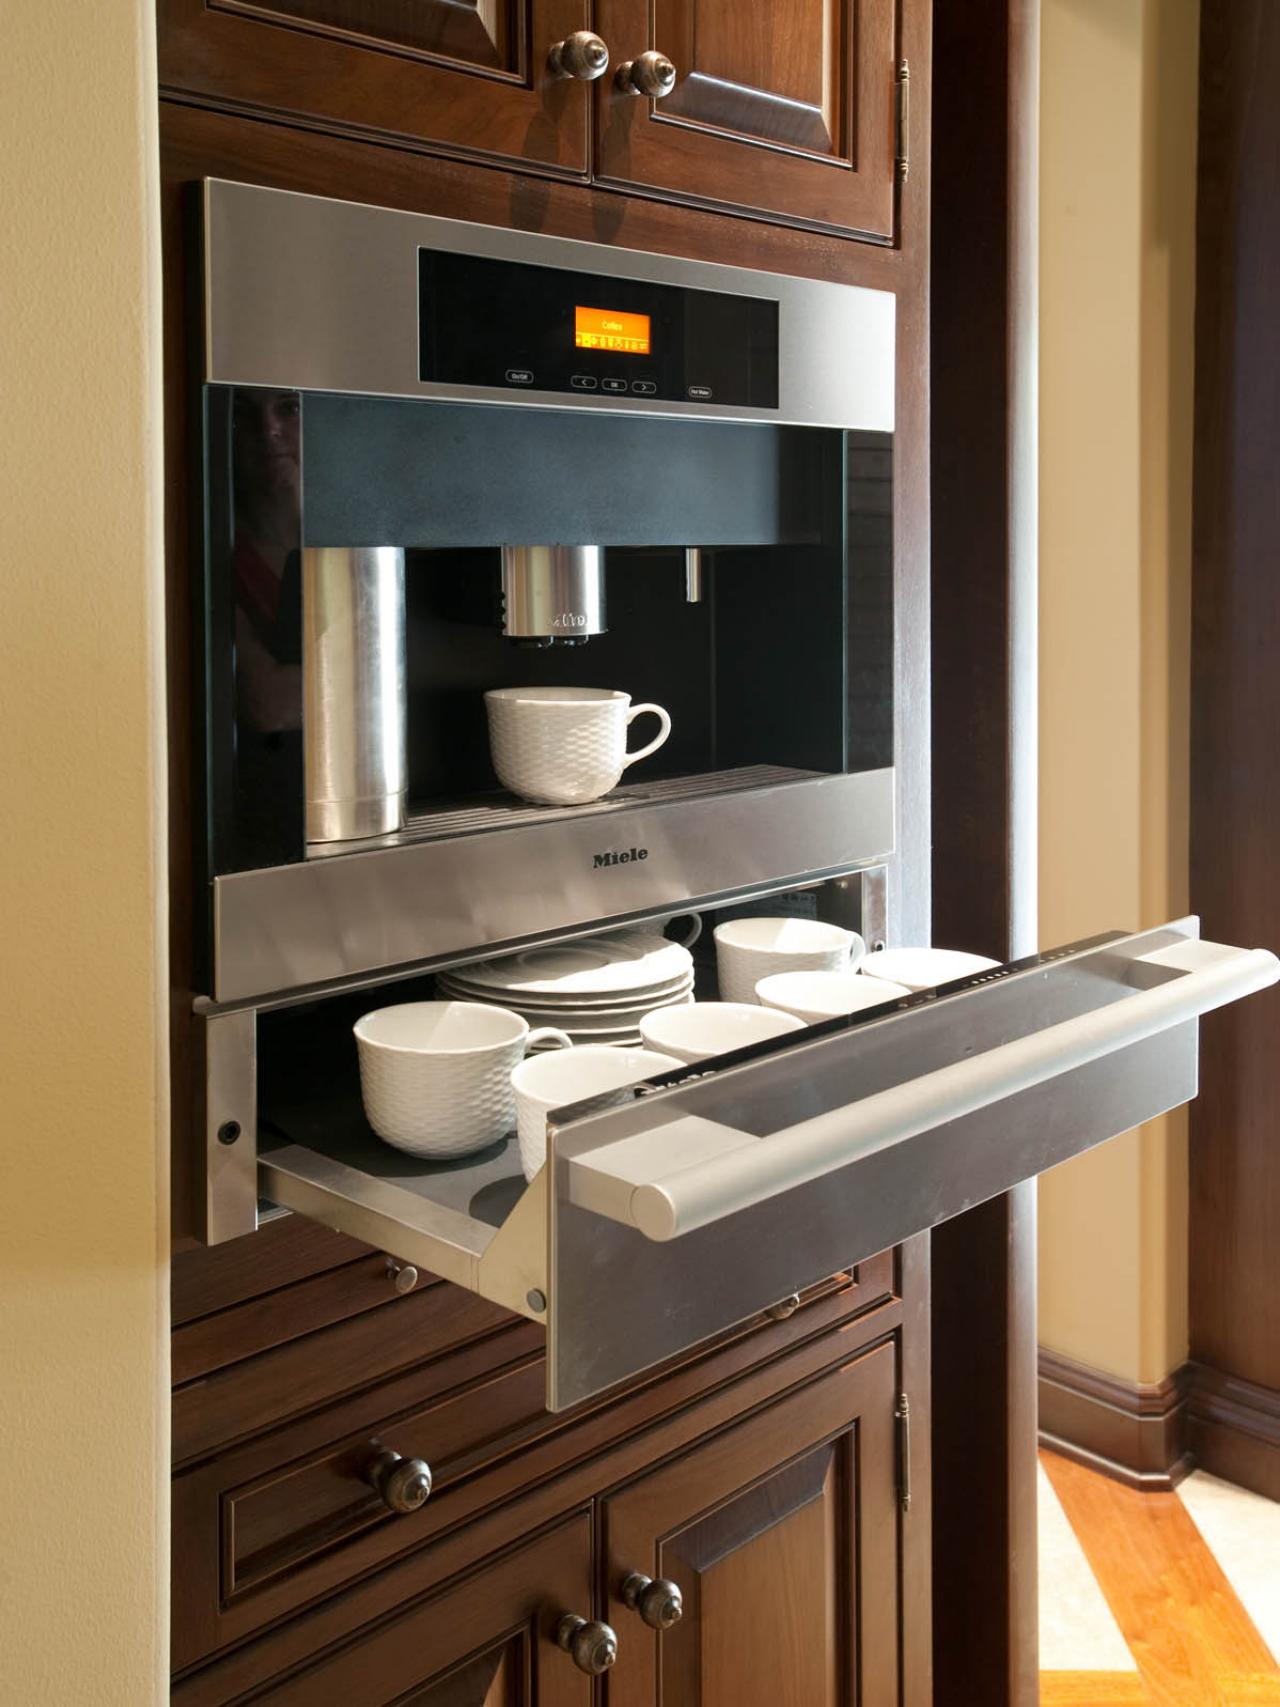 Bedroom Coffee Bar Large And Beautiful Photos Photo To